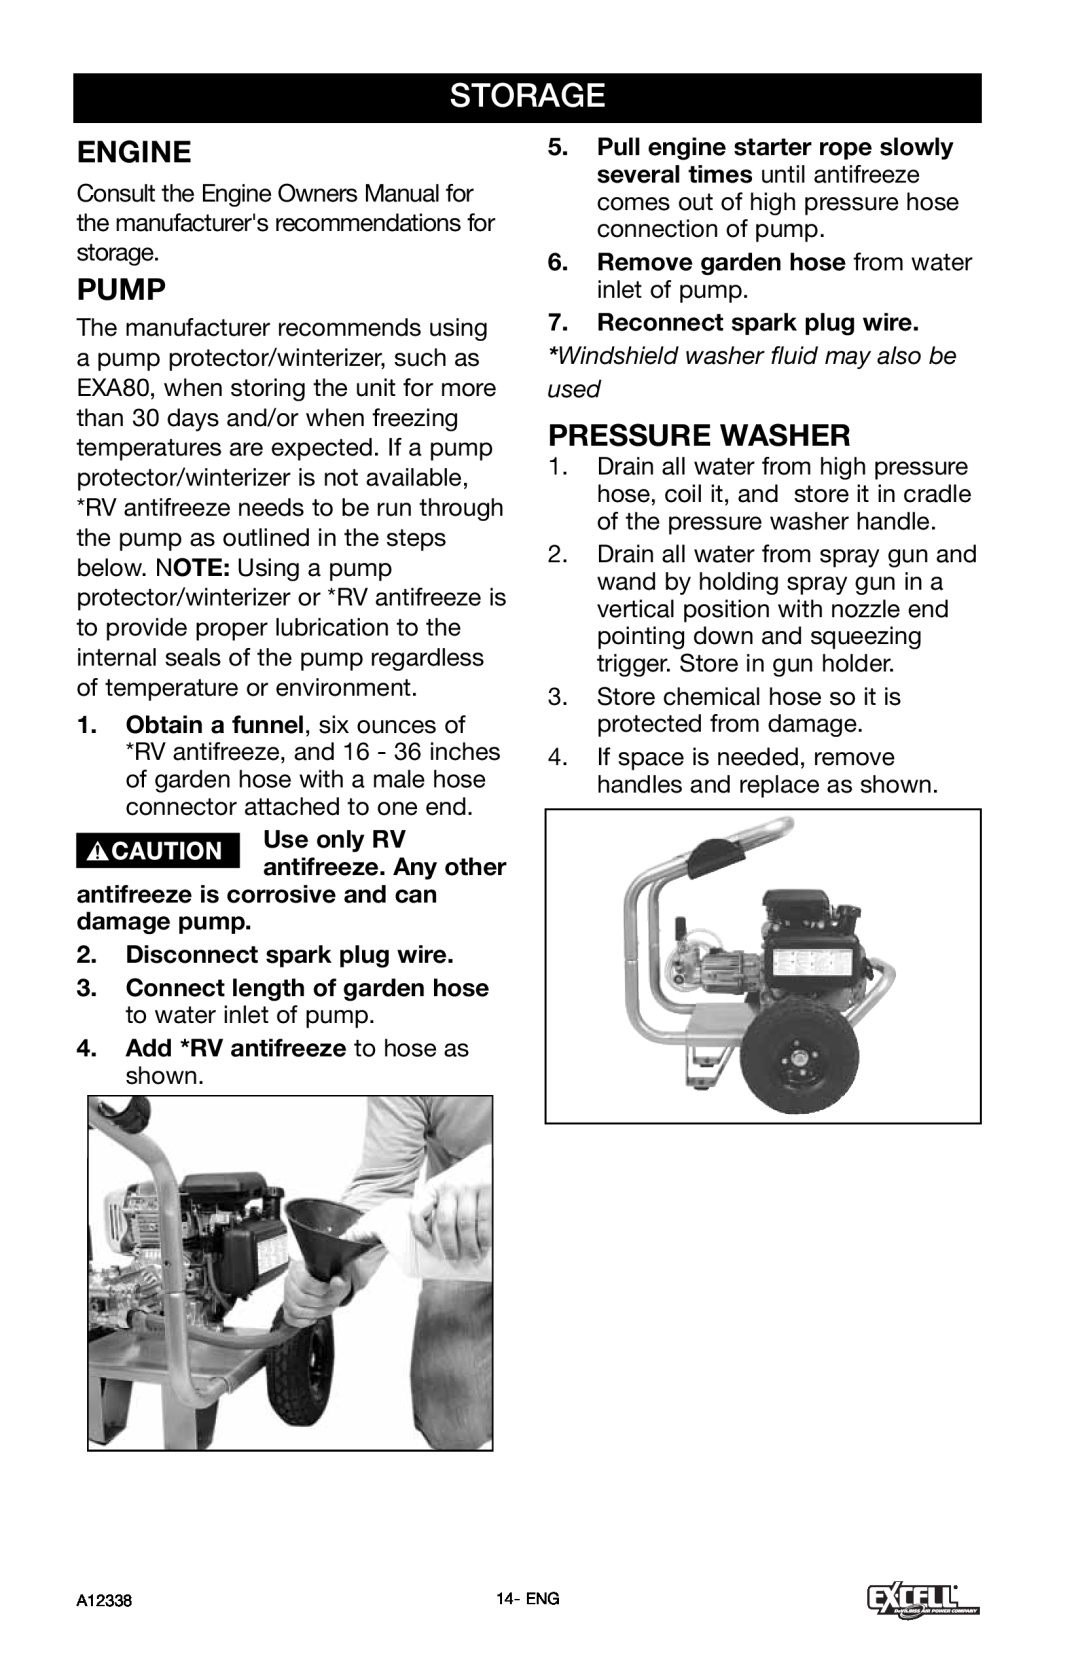 Excell Precision XR2750 operation manual Storage, Pressure Washer, Windshield washer fluid may also be used, Engine, Pump 